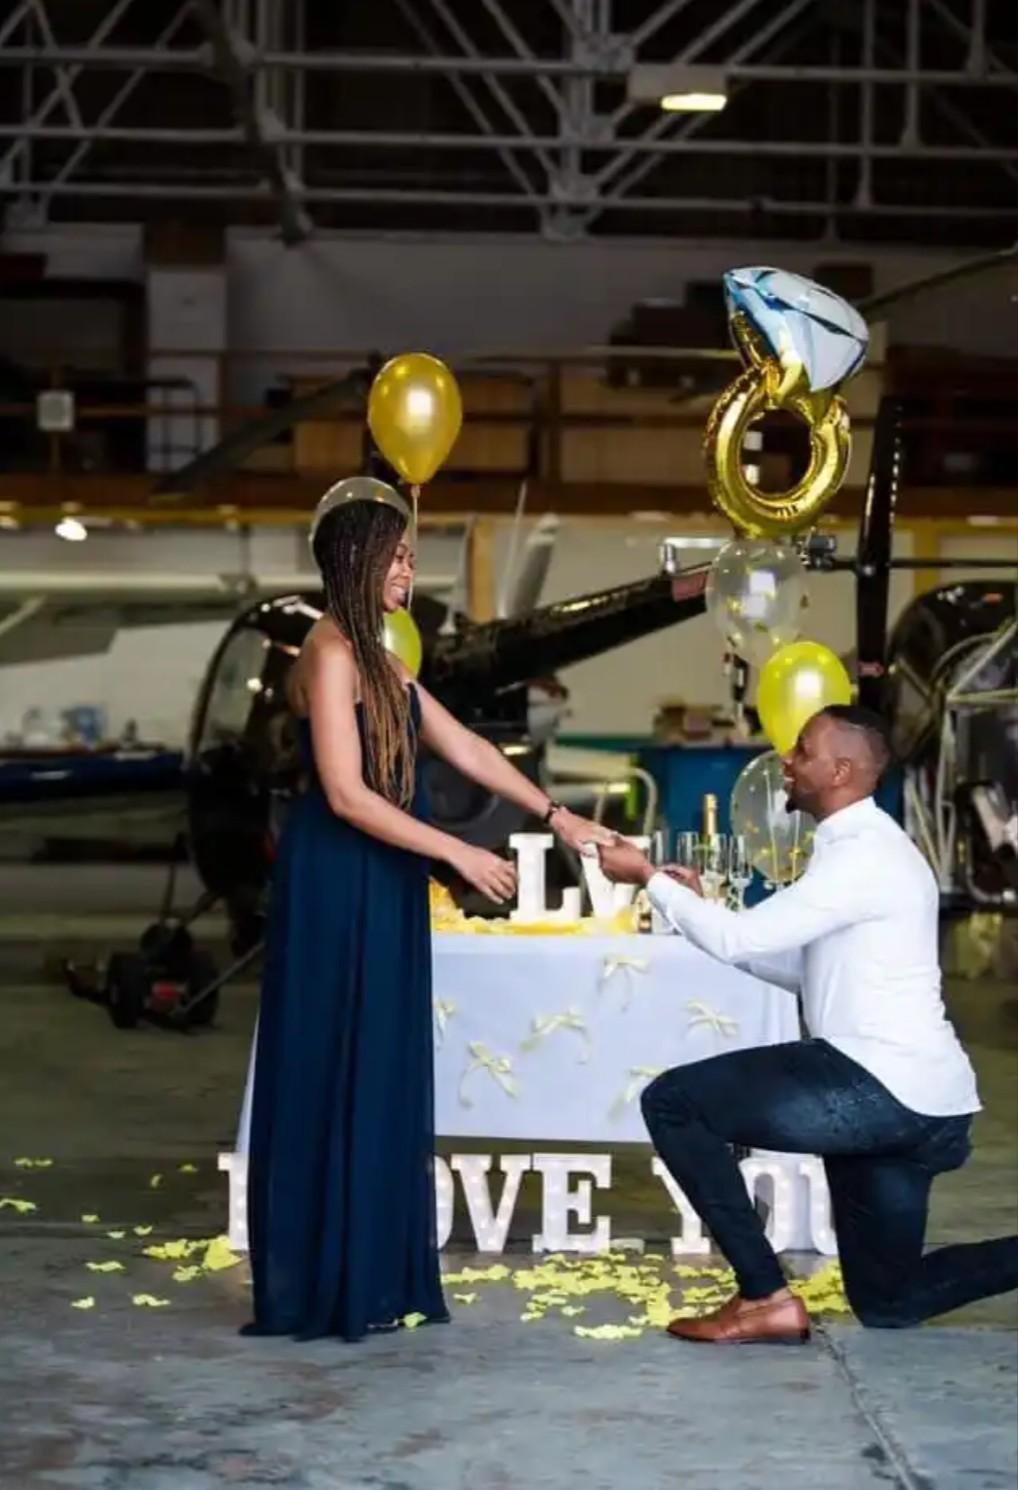 The man took his girlfriend on a helicopter ride to propose to her